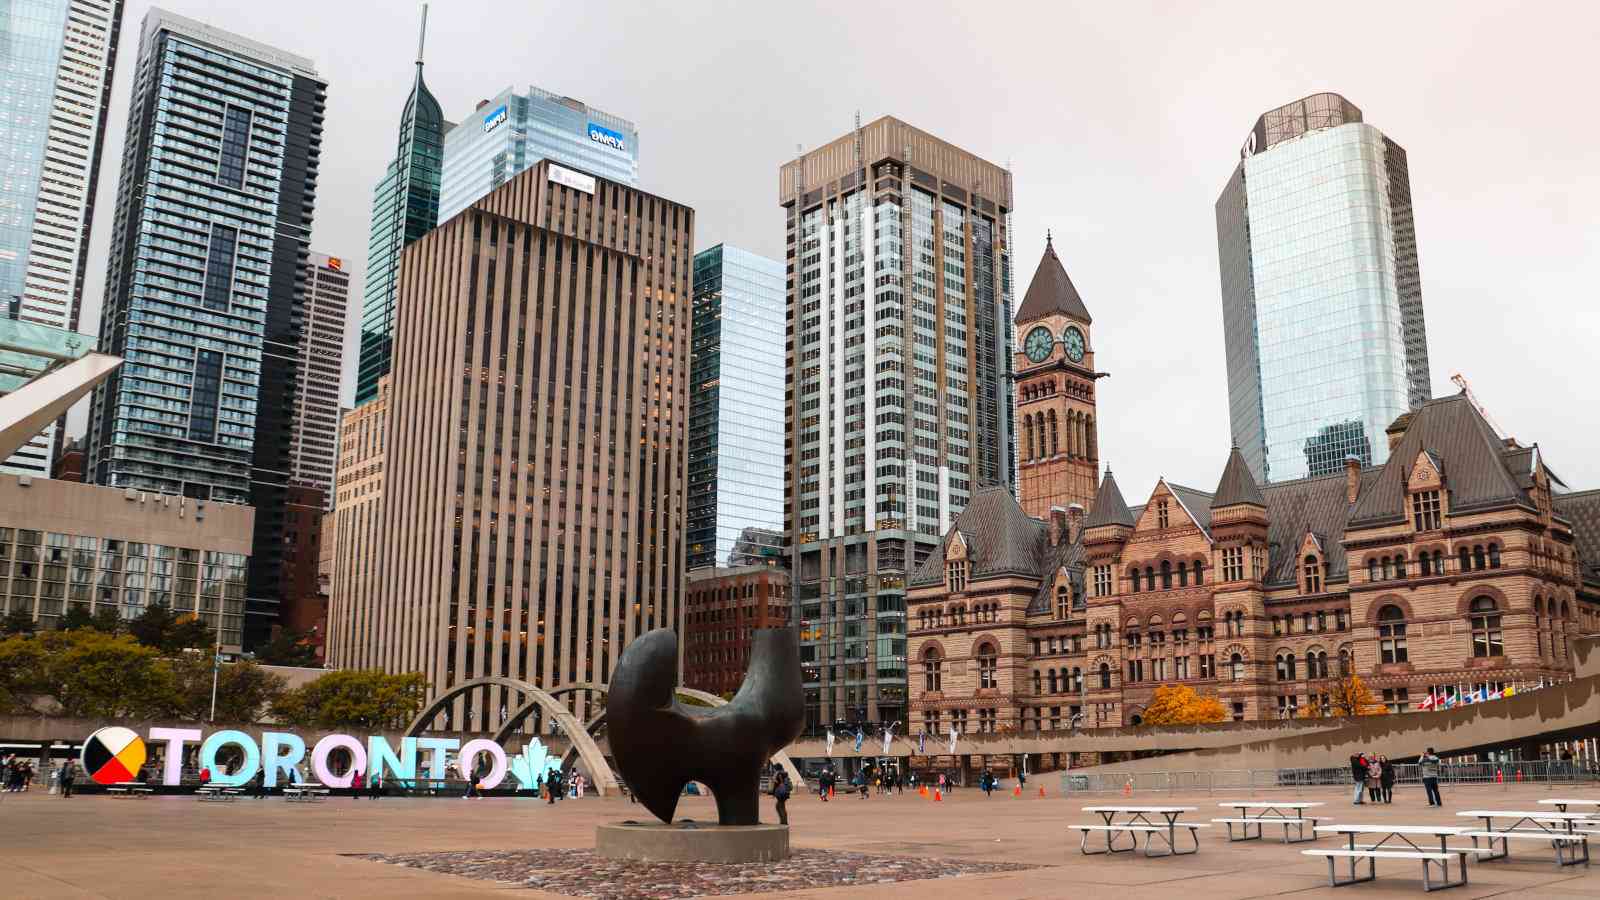 Toronto is a city with lots of fun things to see and do